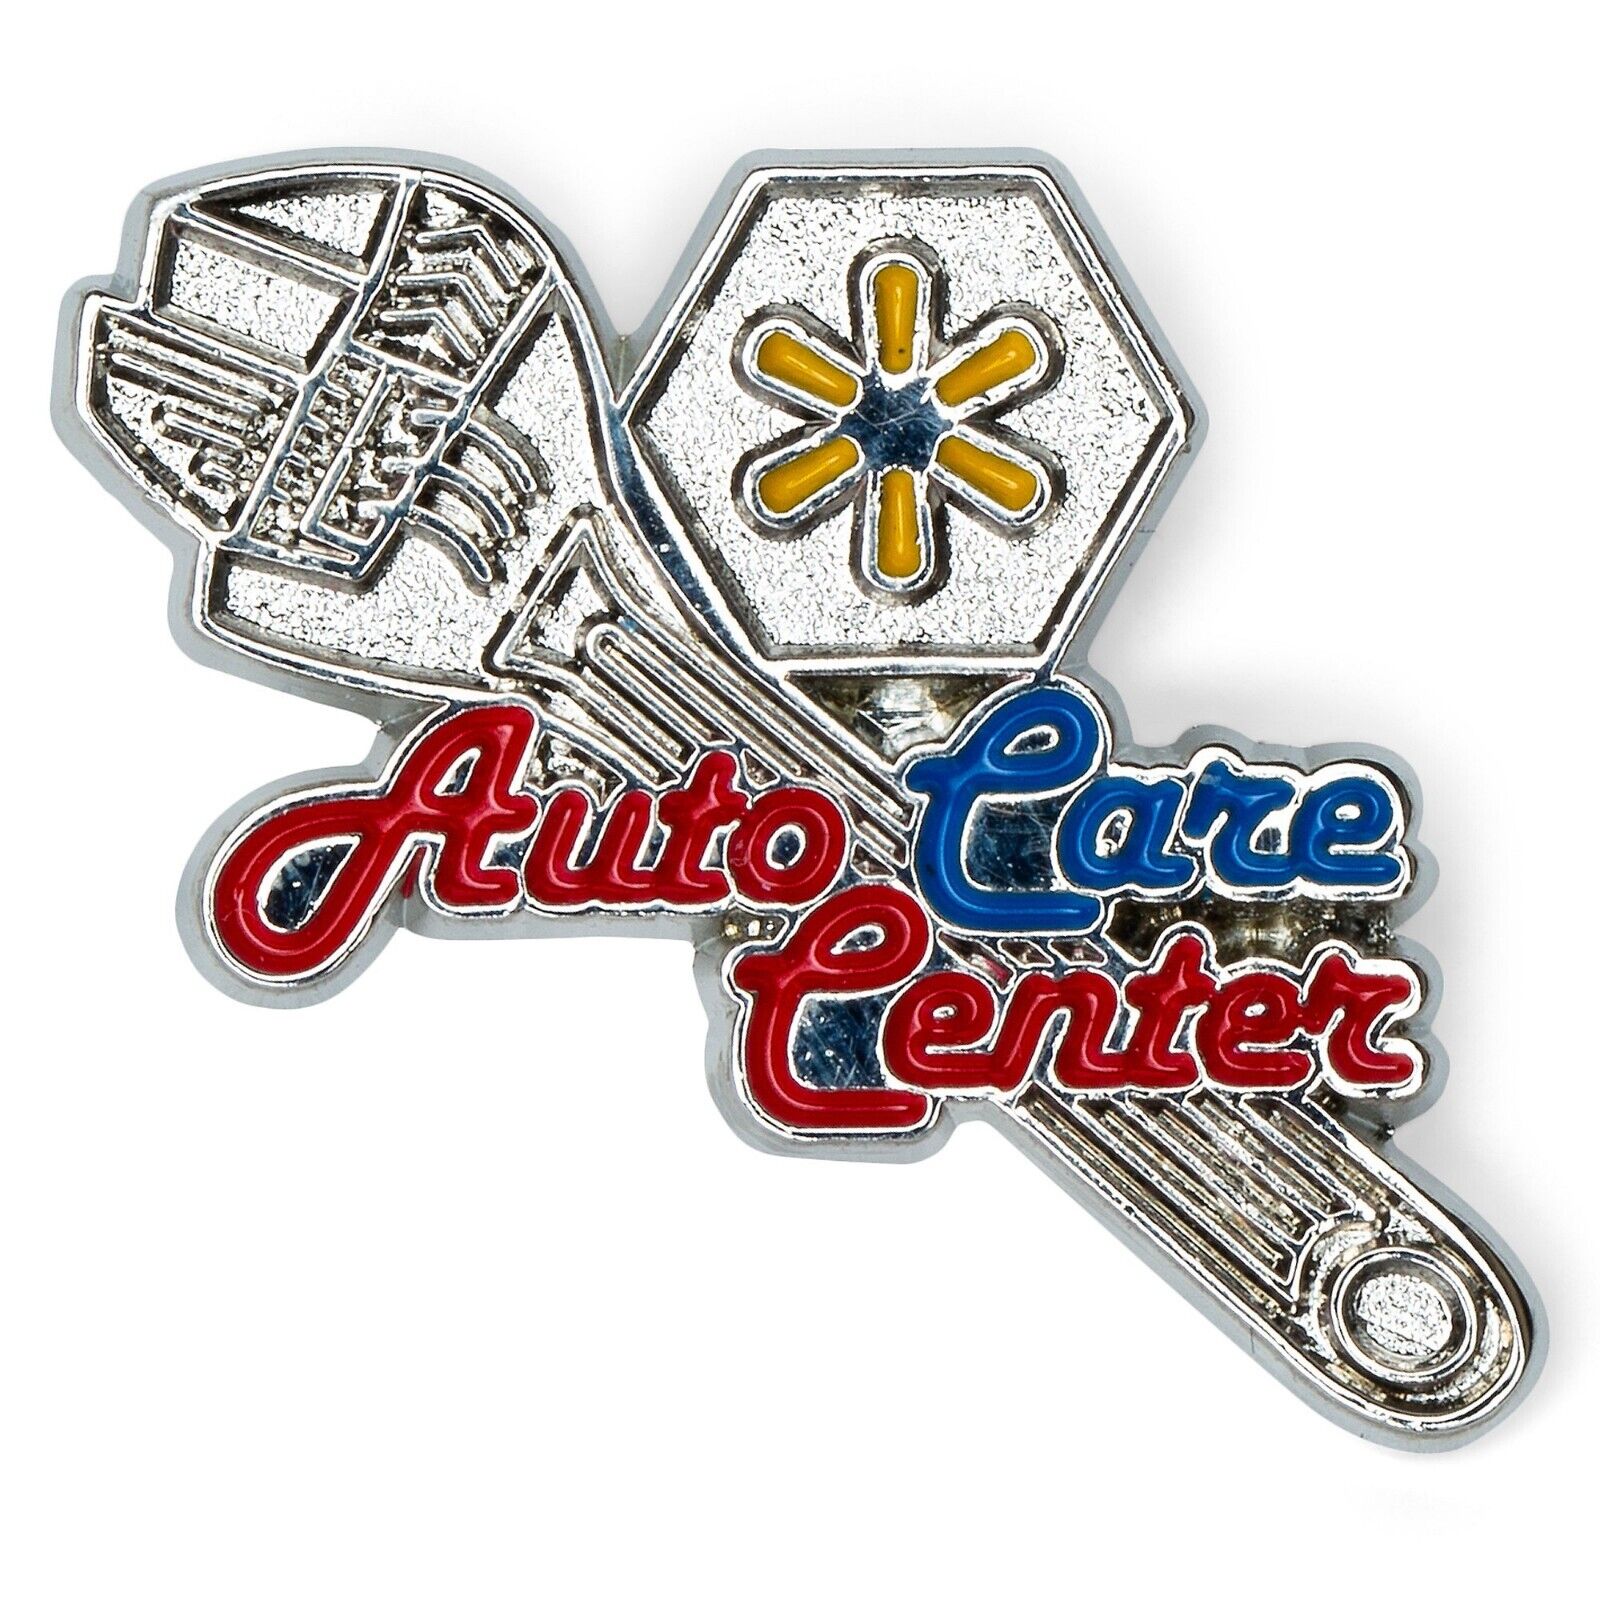 Walmart Limited Edition (Only 500) Metal . Auto Care Center Lapel Pin. RETIRED